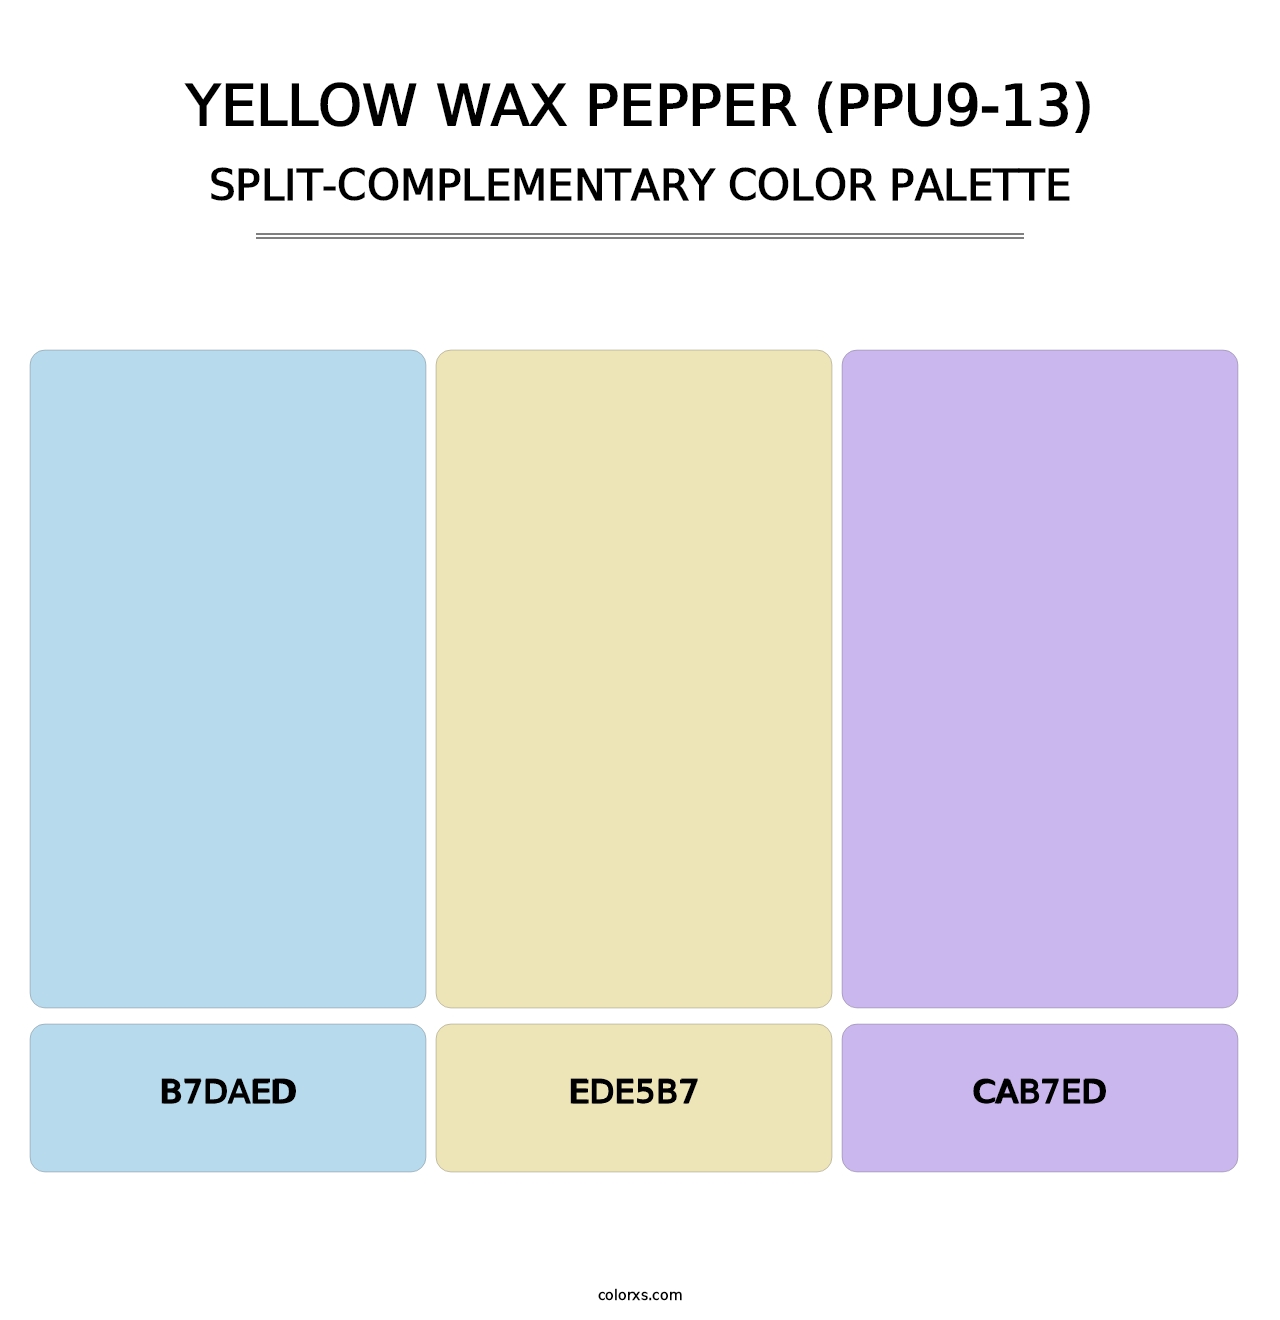 Yellow Wax Pepper (PPU9-13) - Split-Complementary Color Palette